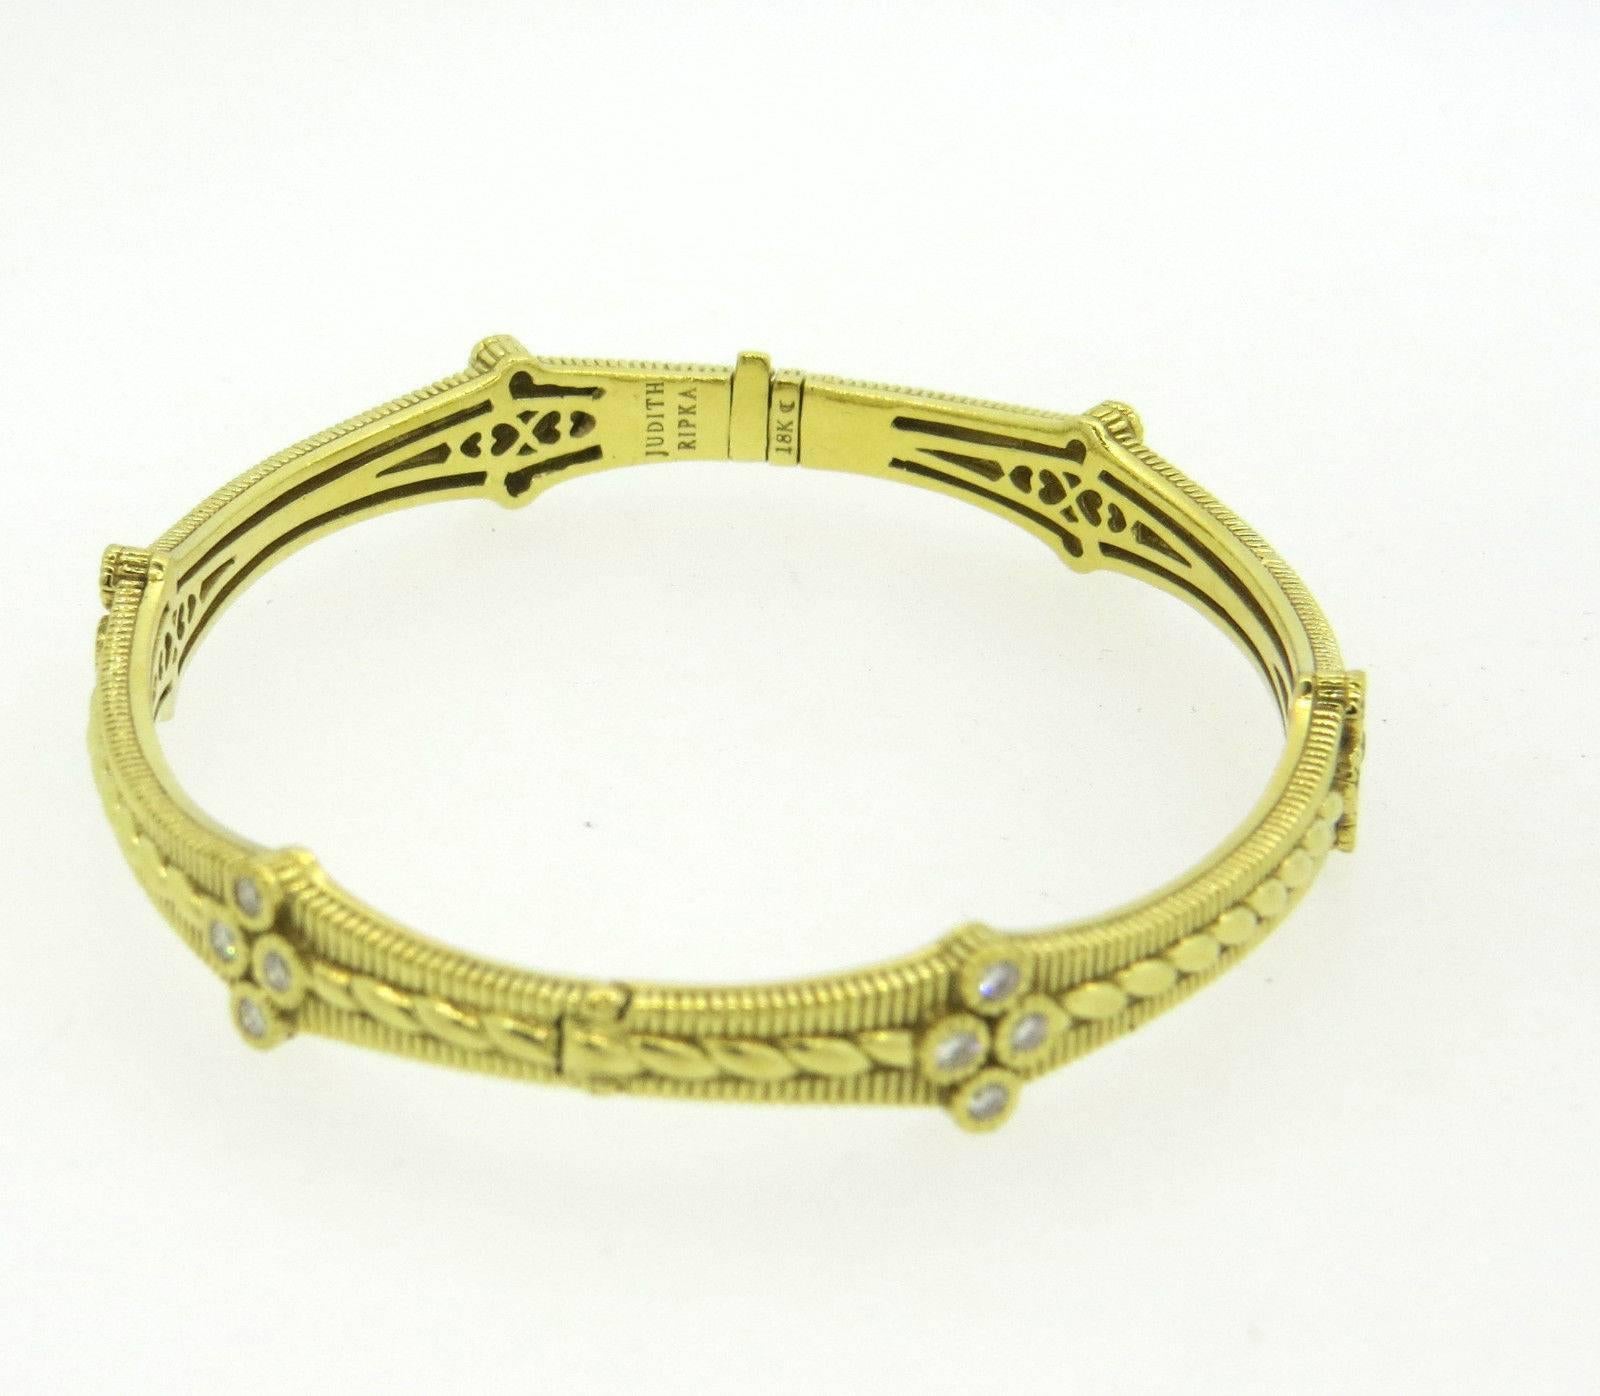 An 18k yellow gold bangle bracelet, set with approx 0.48ctw of GH/VS diamonds. Crafted by Judith Ripka bracelet will fit up to 7